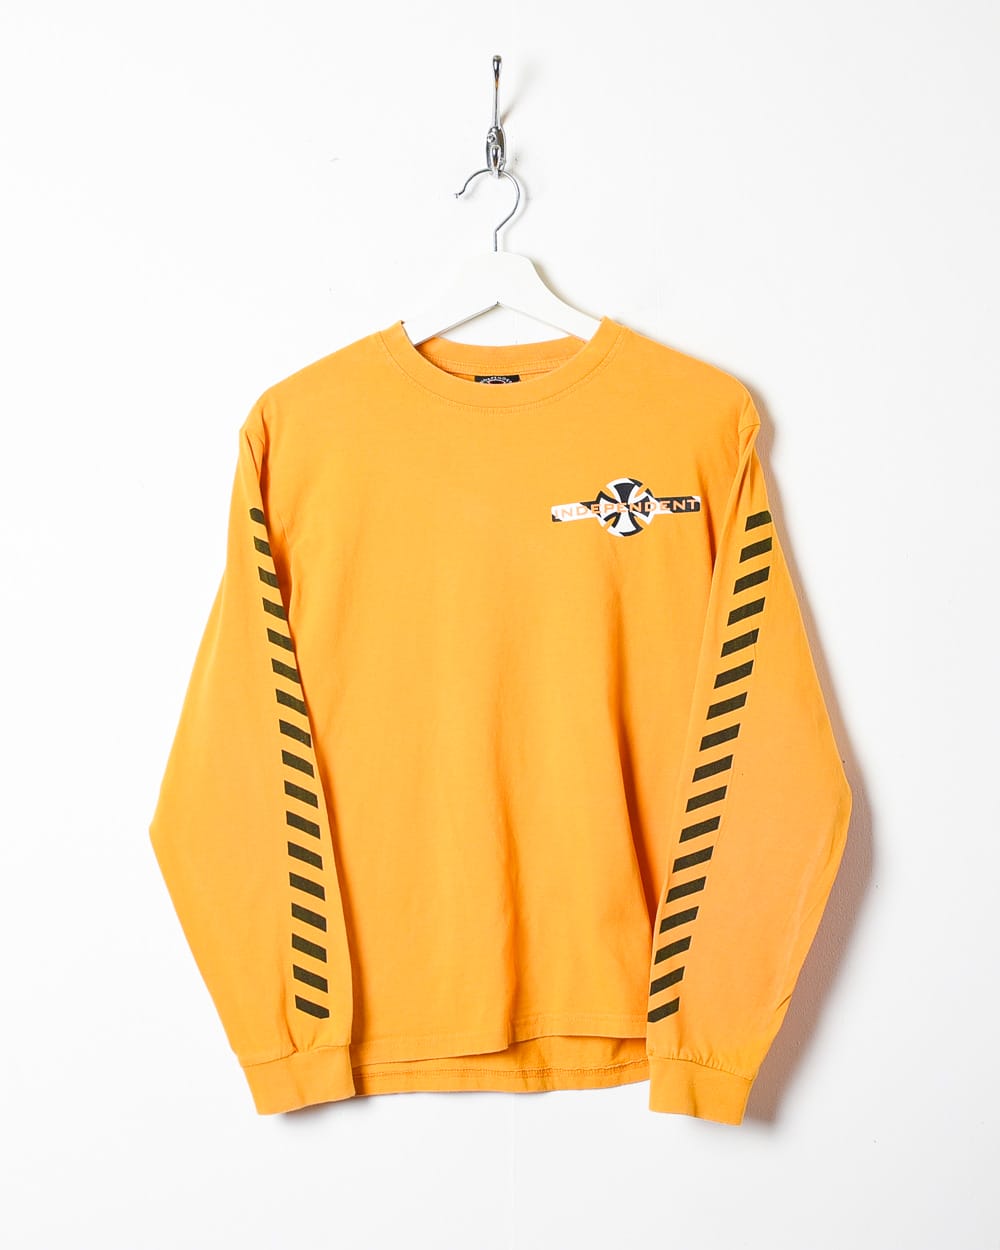 Yellow Independent Trucks Company Long Sleeved T-Shirt - X-Small